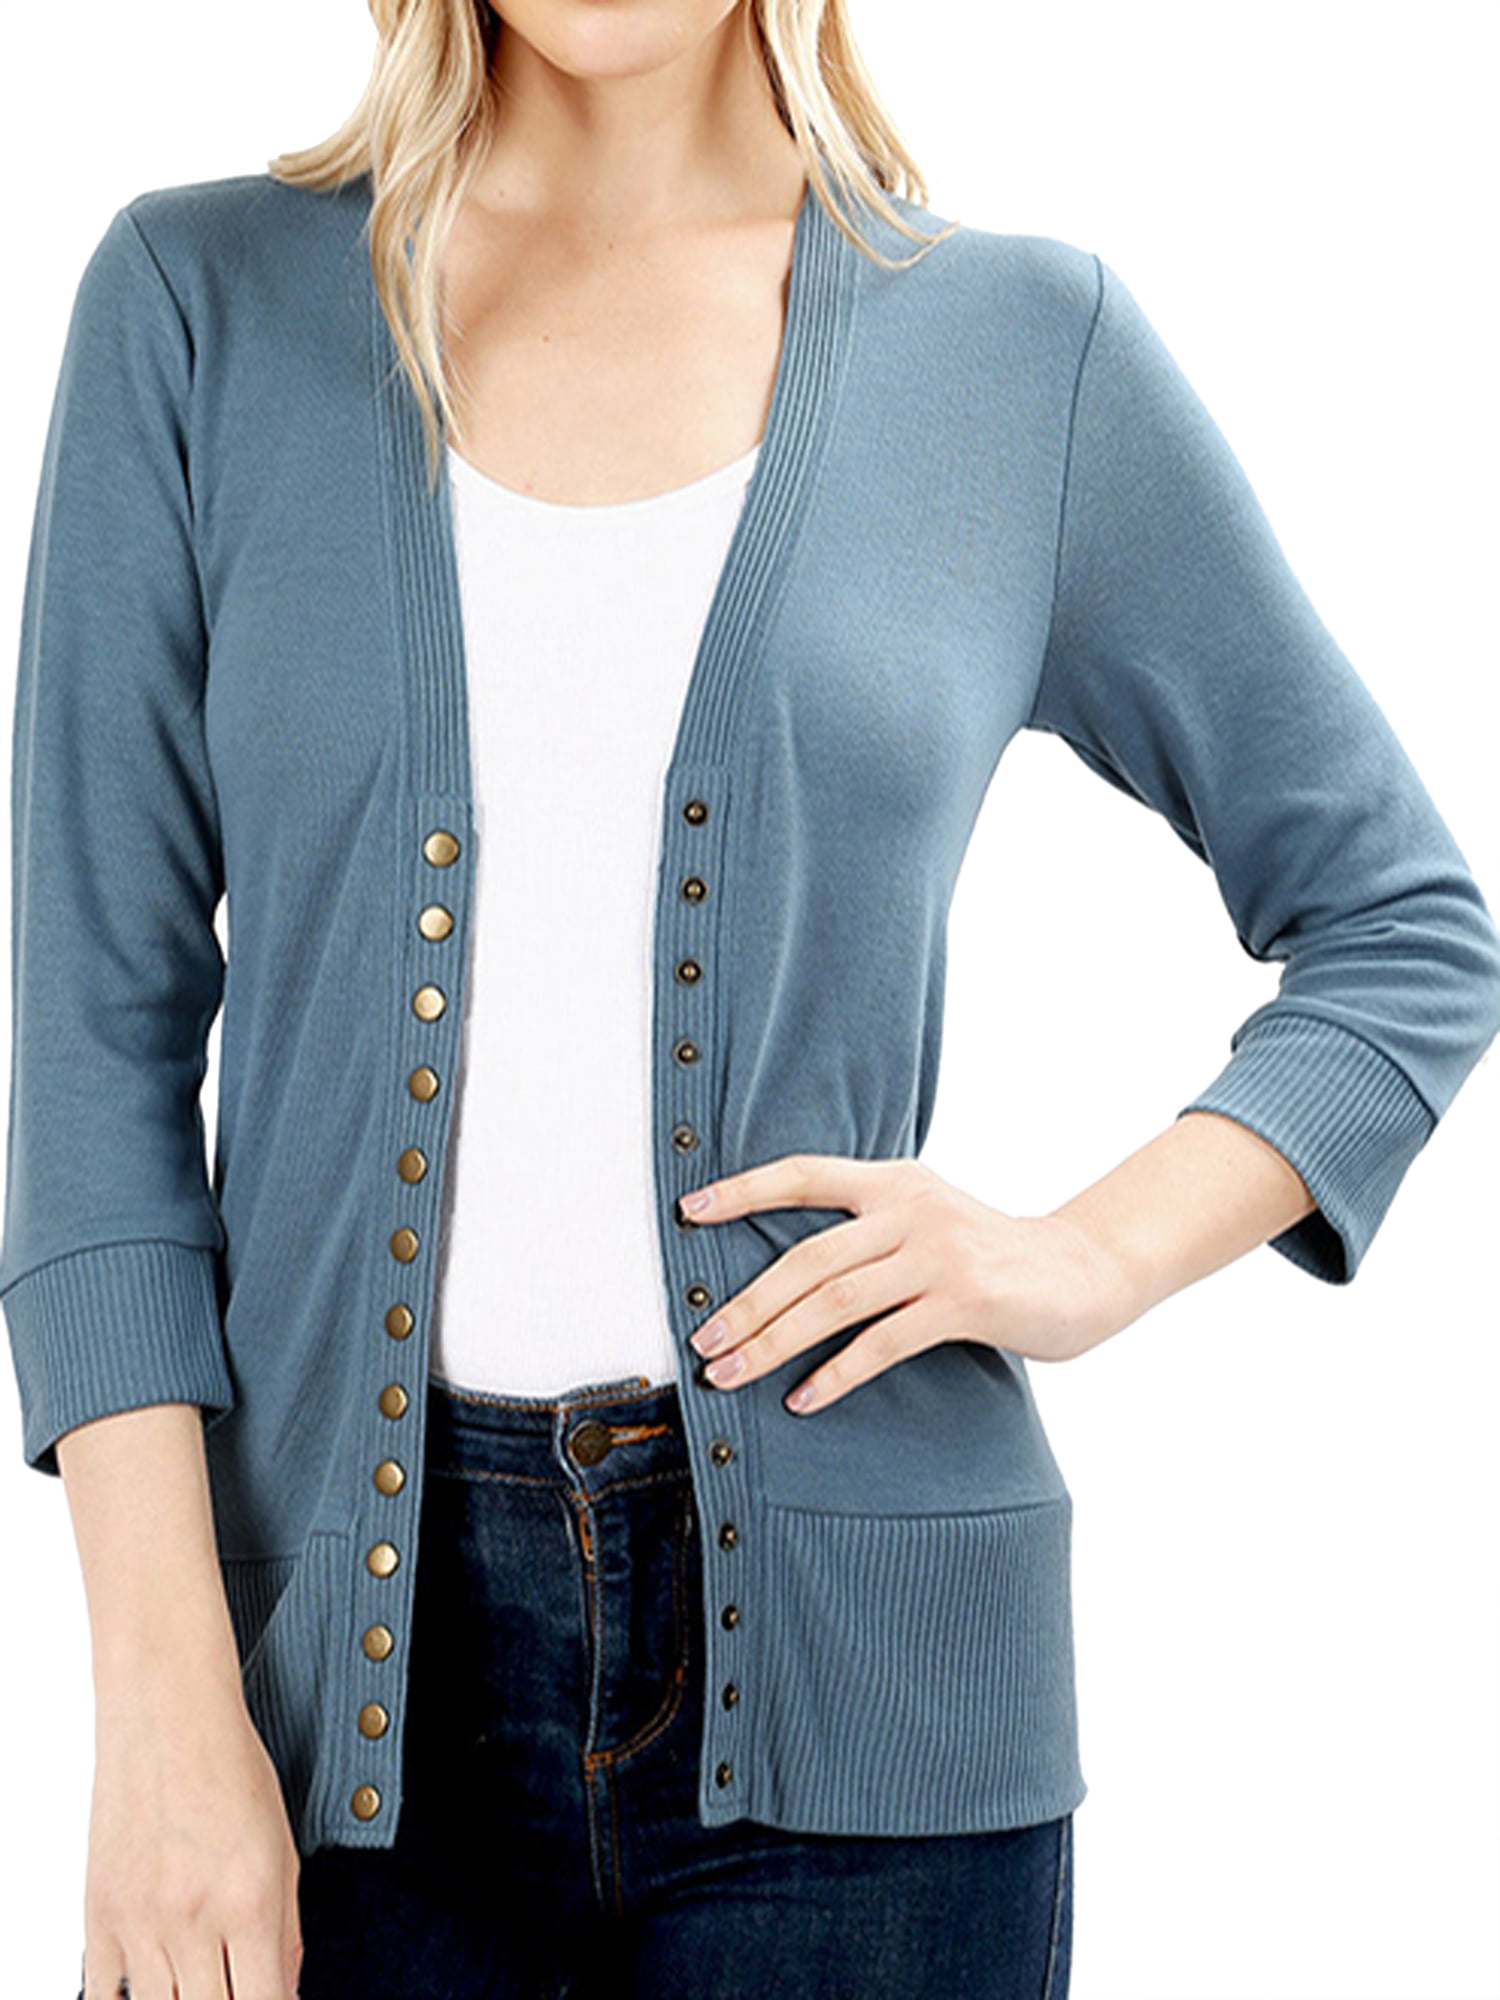 Hot Womens Classic Snap Button Front V-Neck 3/4 Sleeve Knit Cardigan Tops Blouse